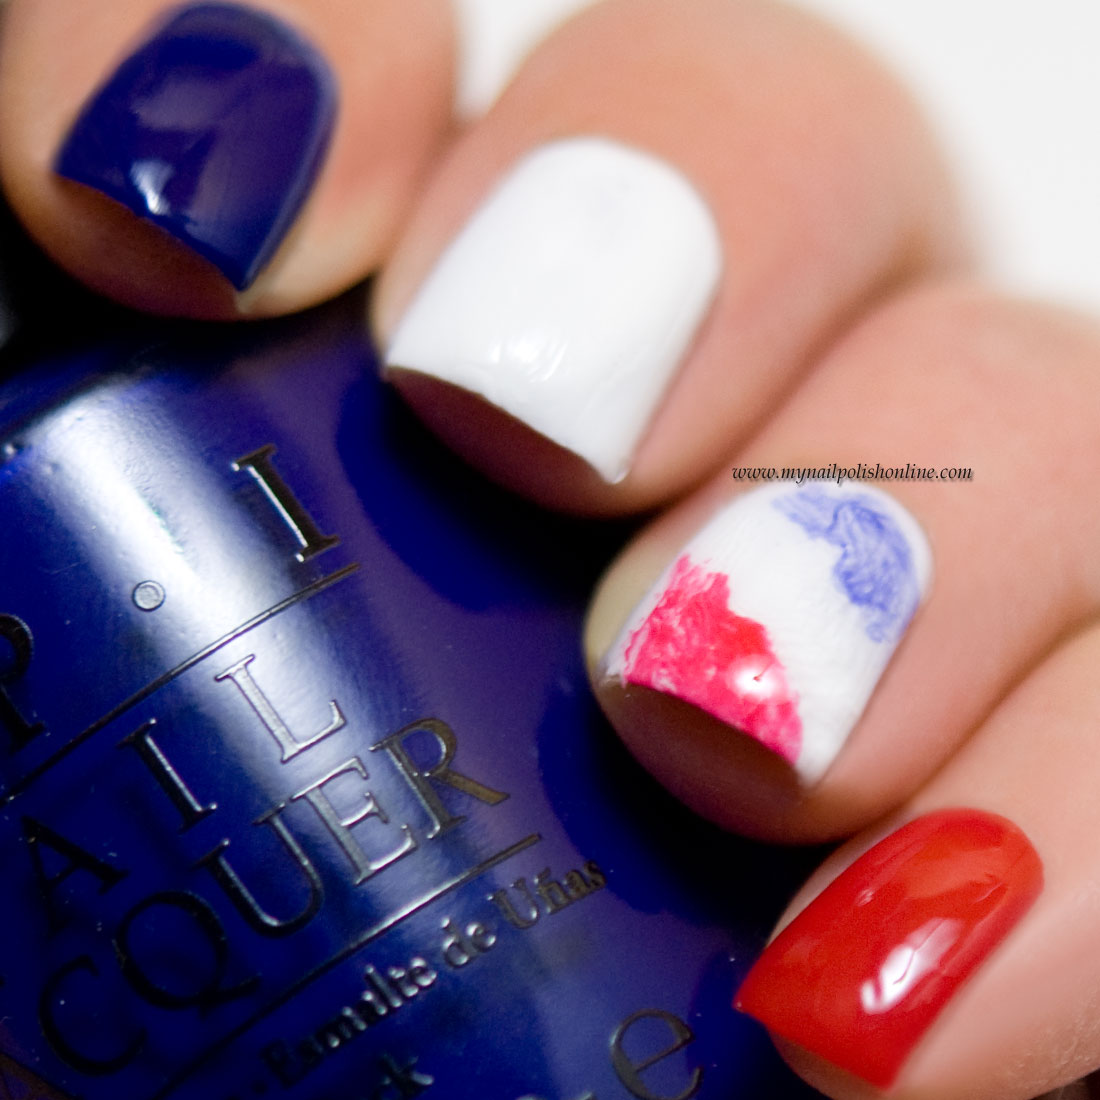 31DC2016 - Inspired by a flag - My Nail Polish Online